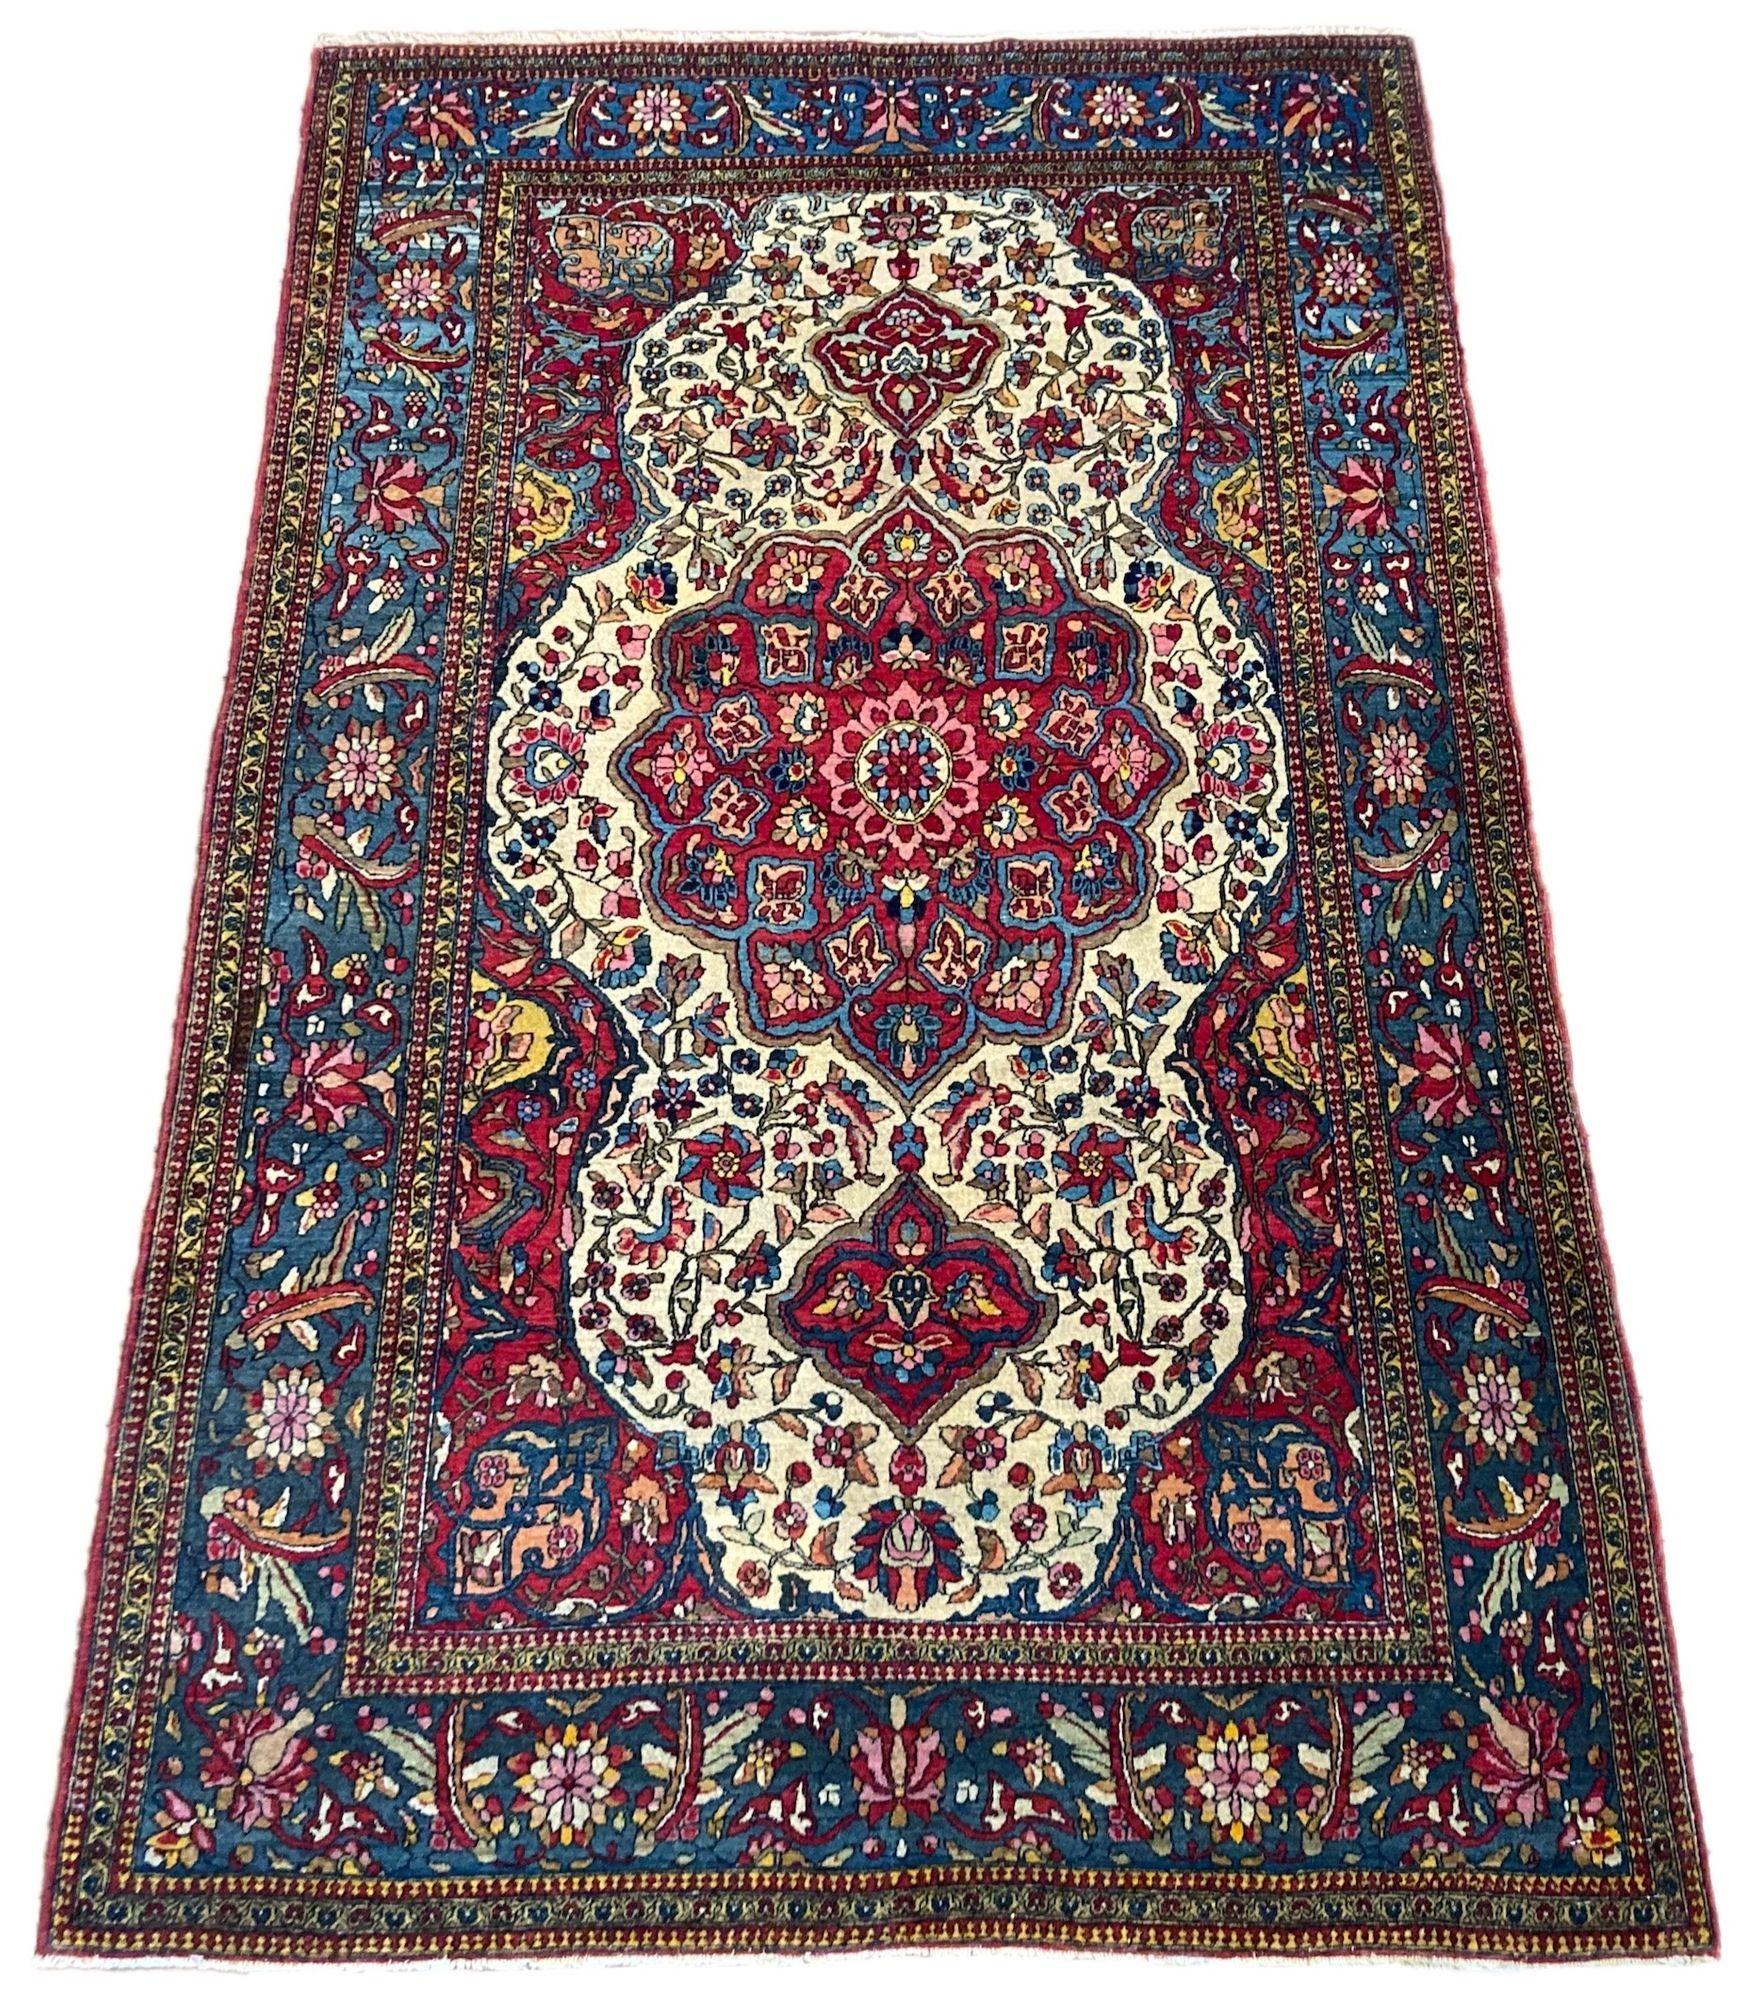 An outstanding antique Isfahan rug, handwoven circa 1900 with a classical floral medallion on an ivory field and indigo border. Finely woven with great wool and fabulous secondary colours, particularly the pinks and golds in the field.
Size: 2.02m